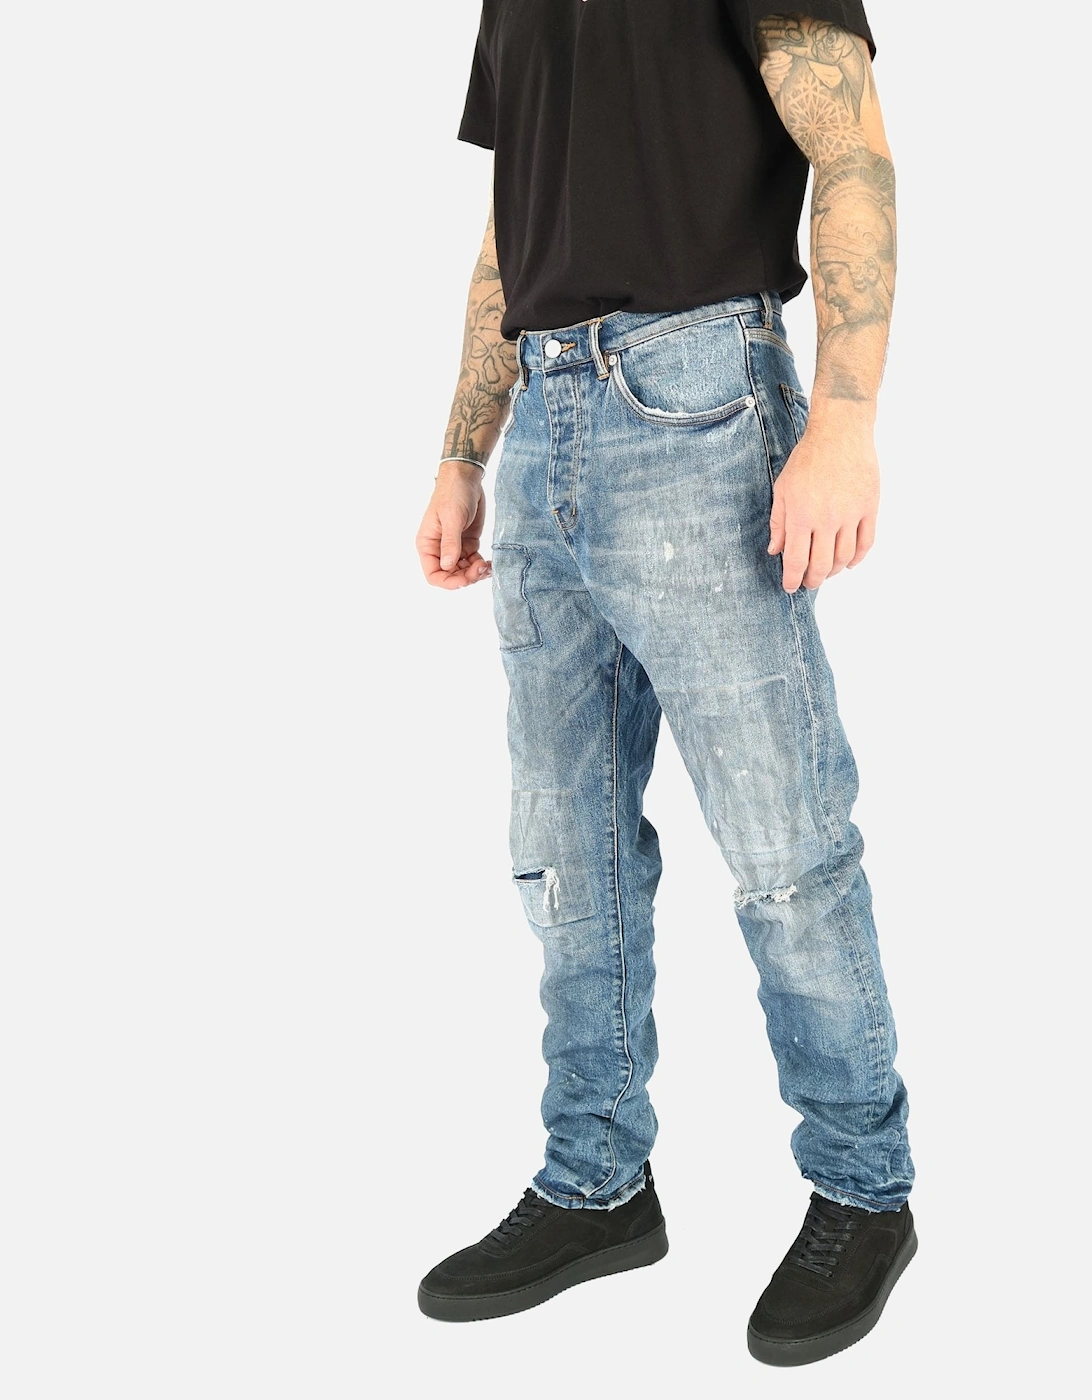 Patch Ripped Knee Paint Straight Fit Stetch Jean